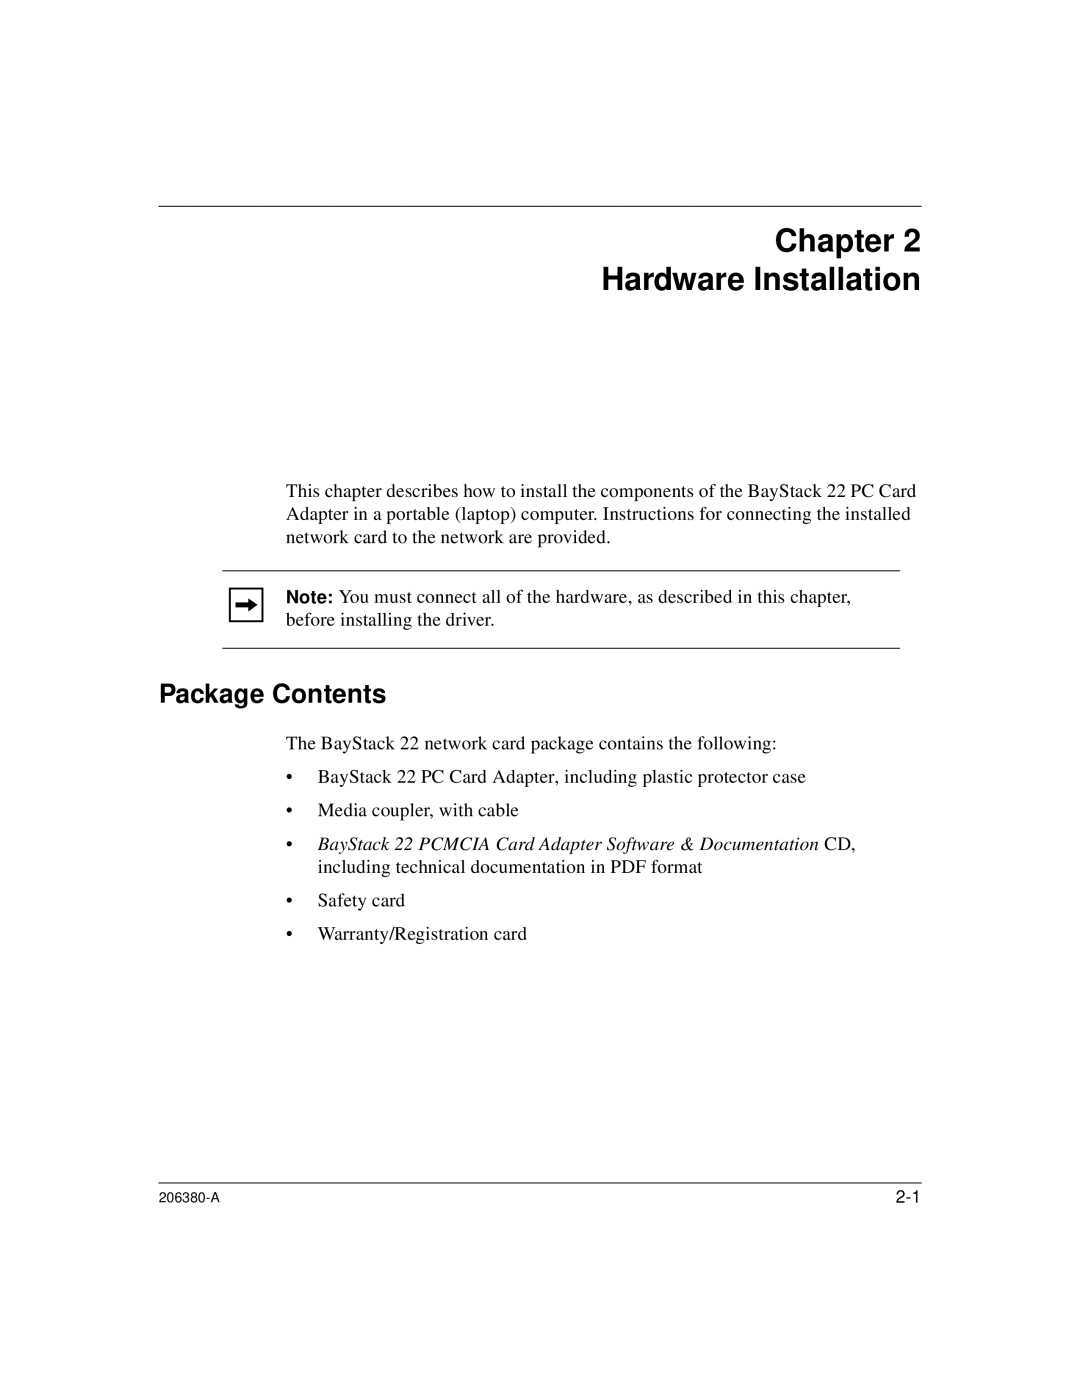 3Com 206380-A manual Chapter Hardware Installation, Package Contents 